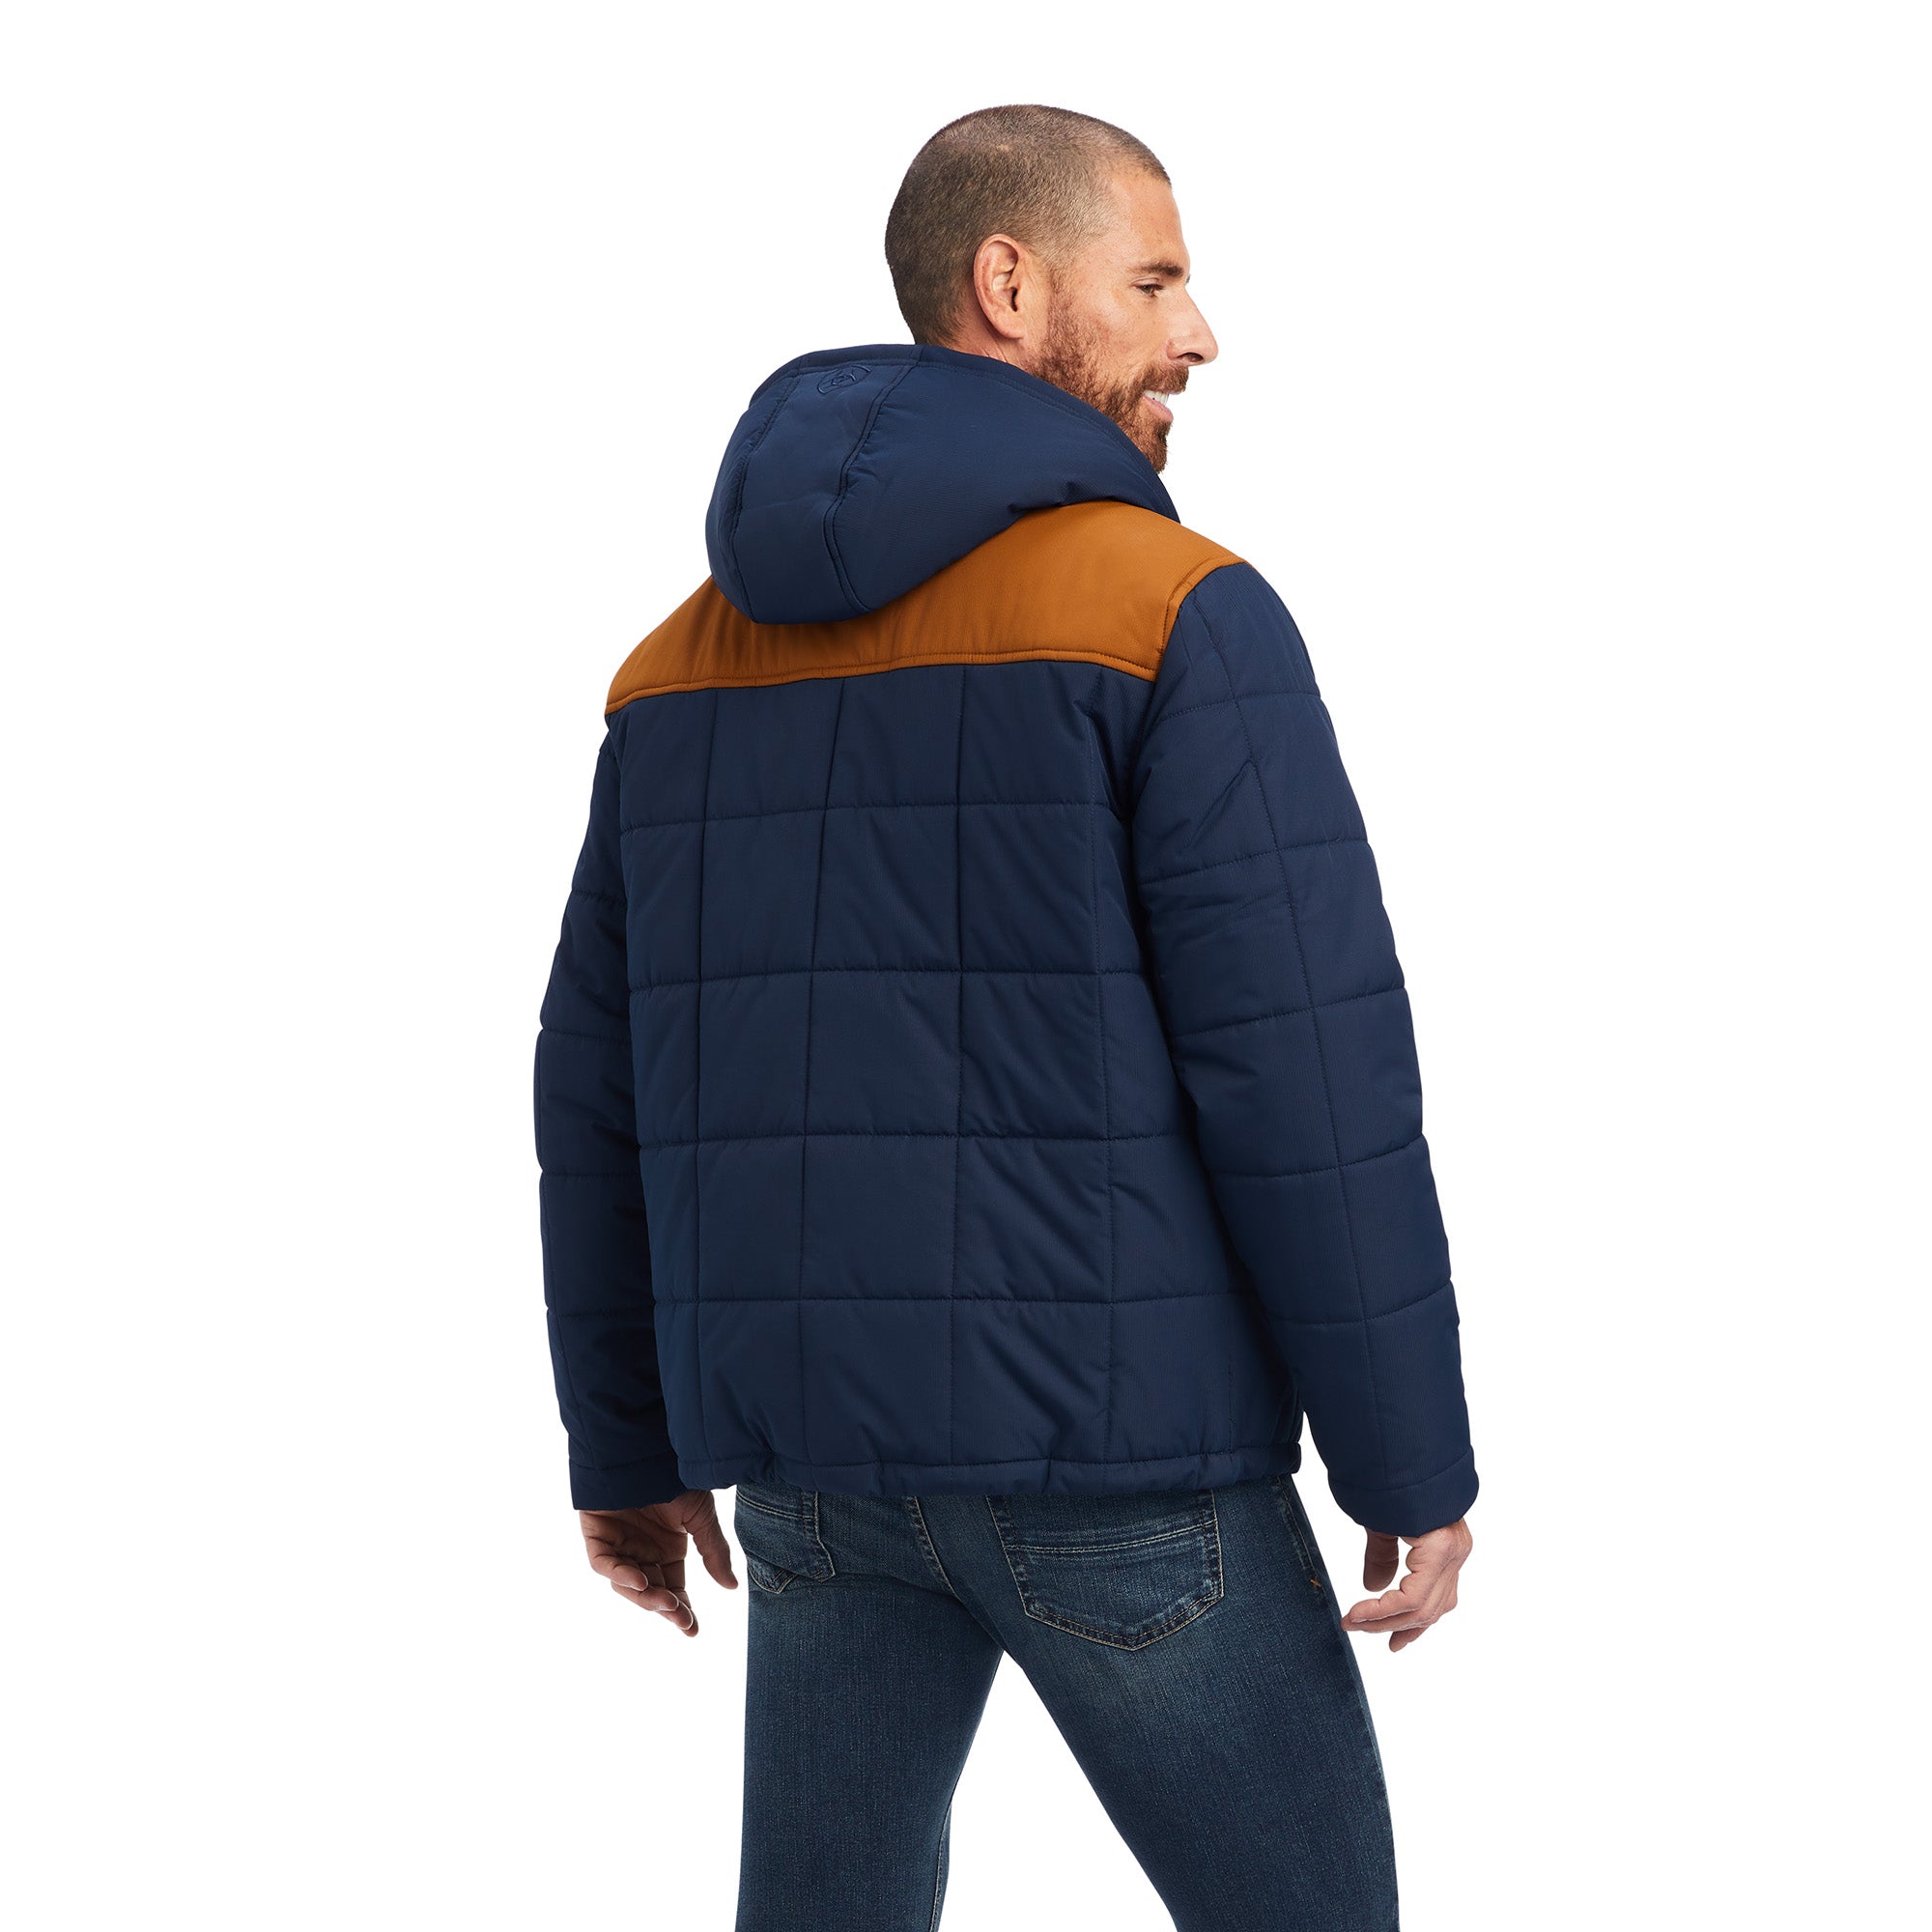 Image of back Ariat Men's Crius Insulated Jacket.